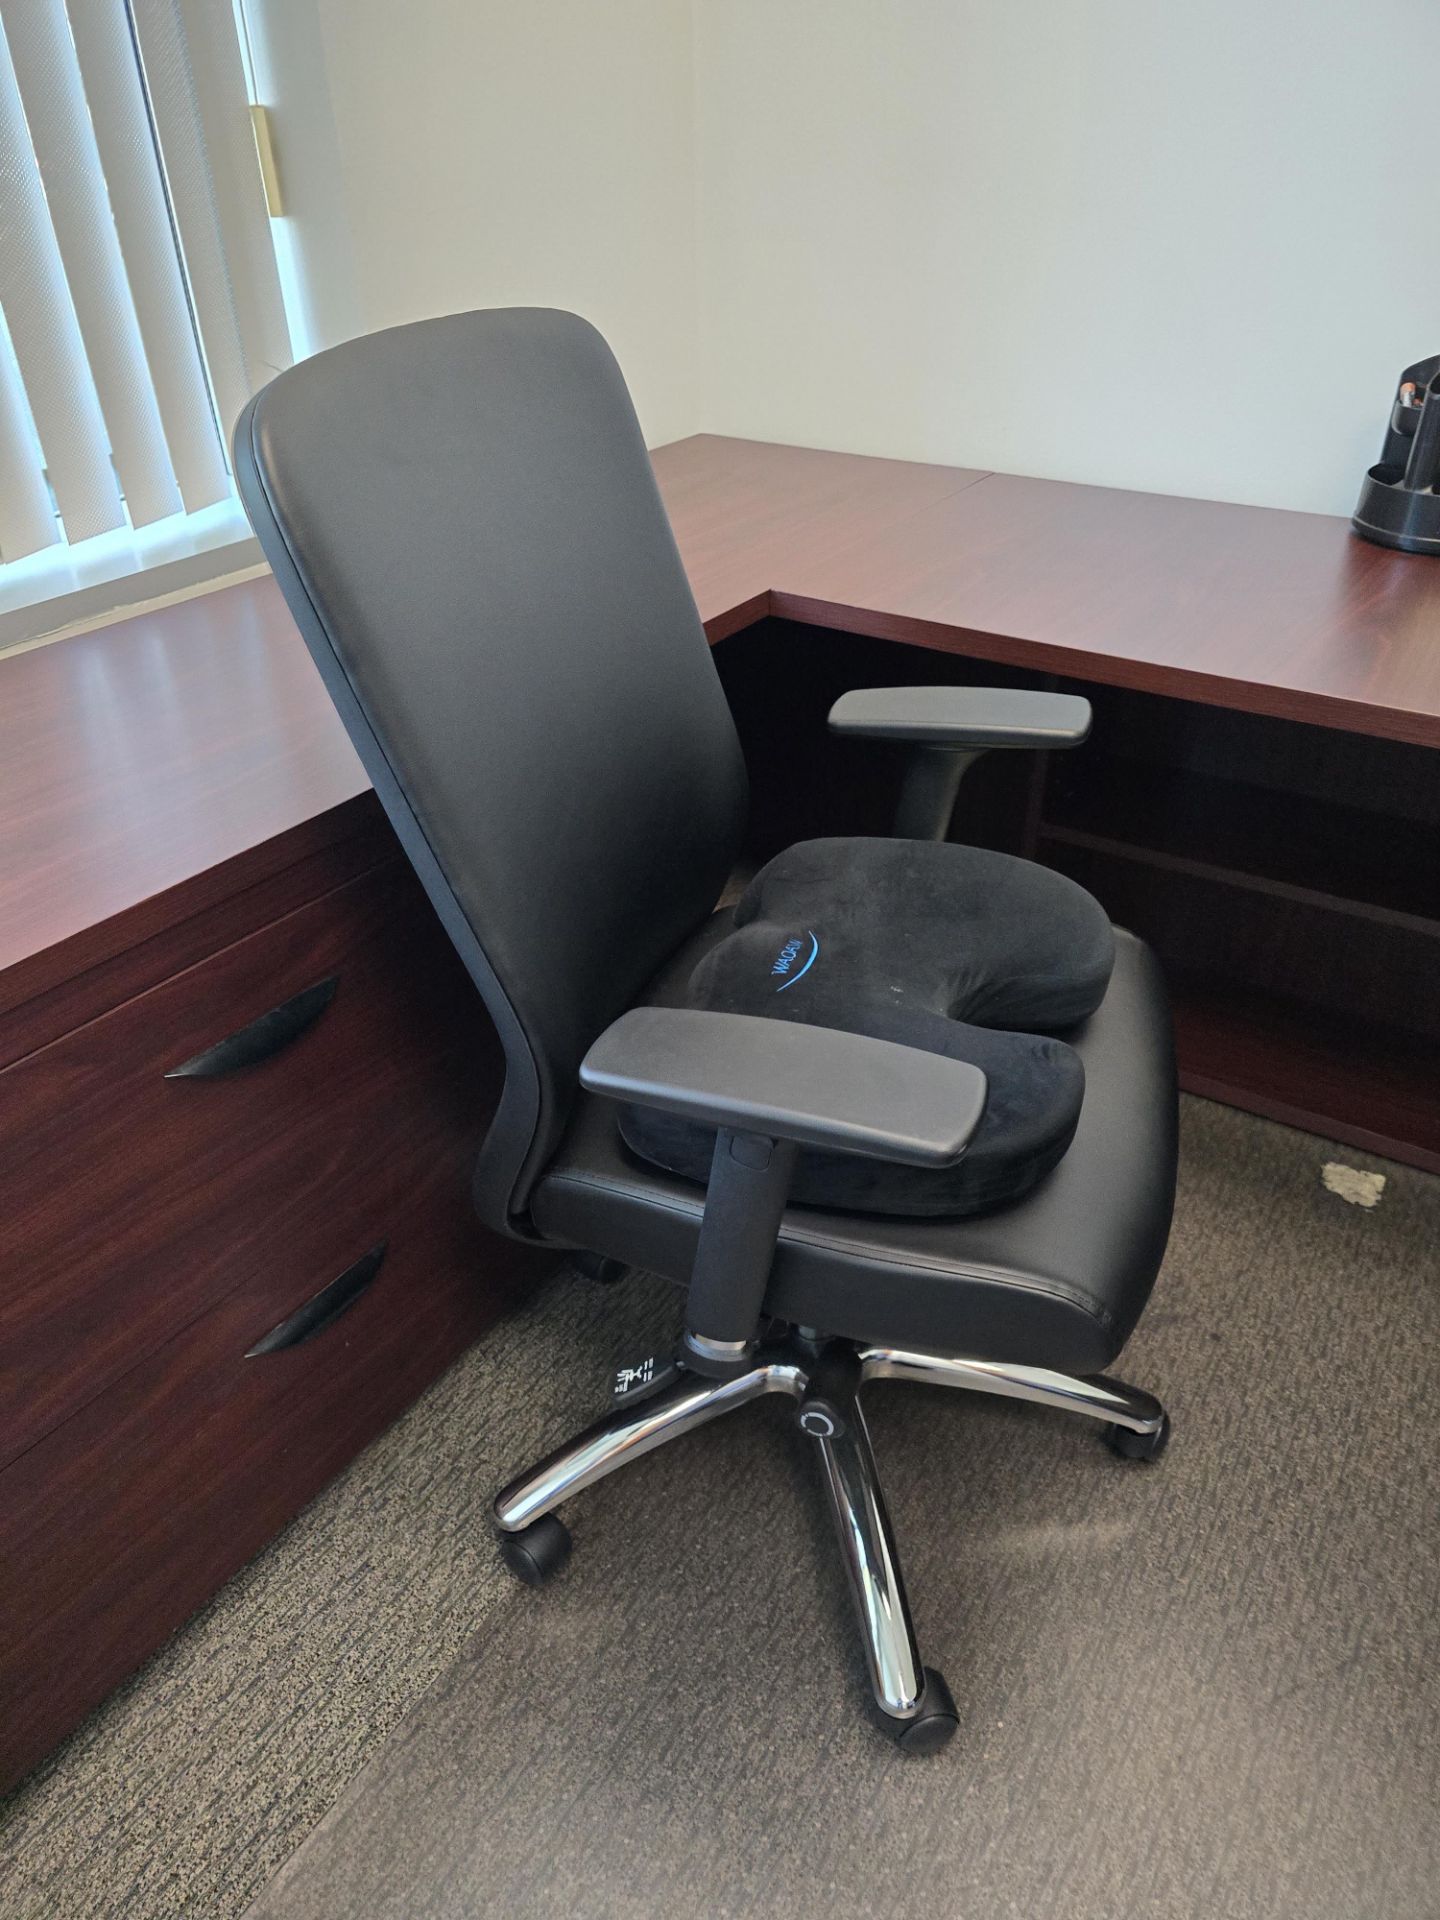 BLACK HL OFFICE CHAIR - Image 2 of 2